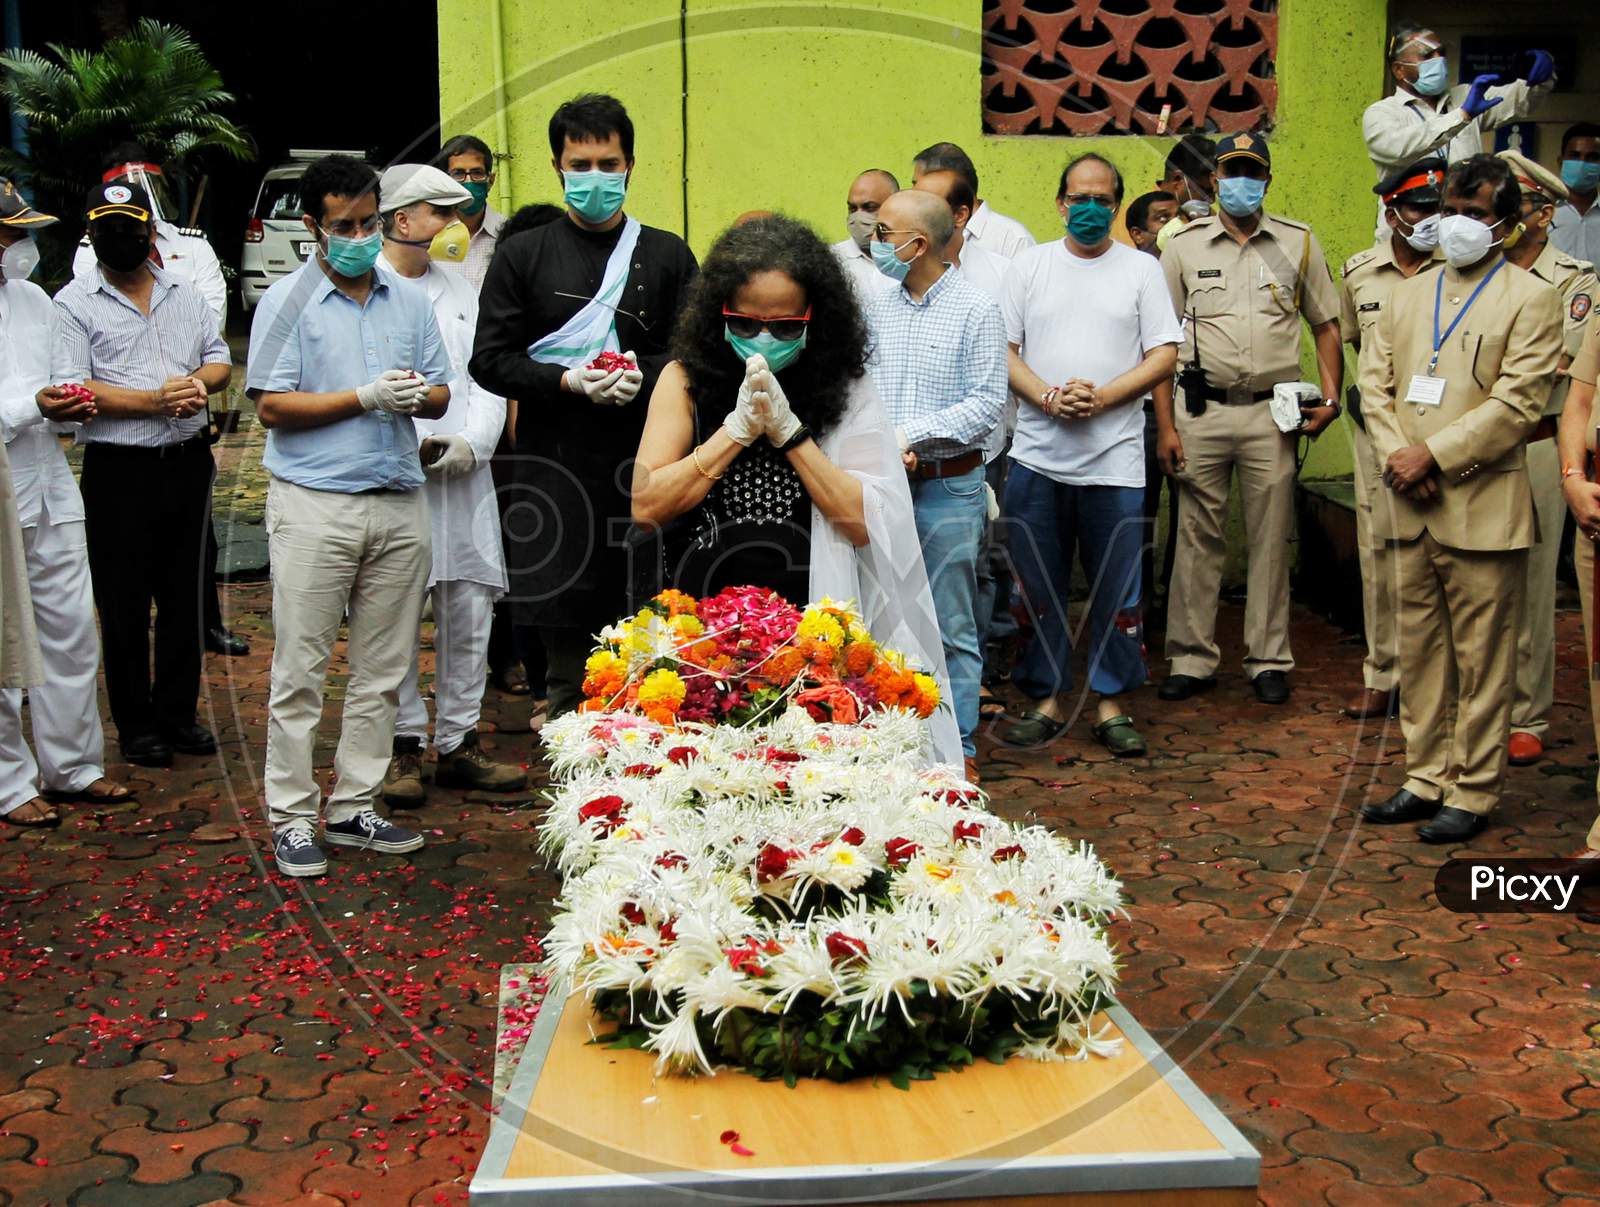 Wife of deceased Air India pilot Deepak Sathe pays him respect during his funeral in Mumbai, India on August 11, 2020.